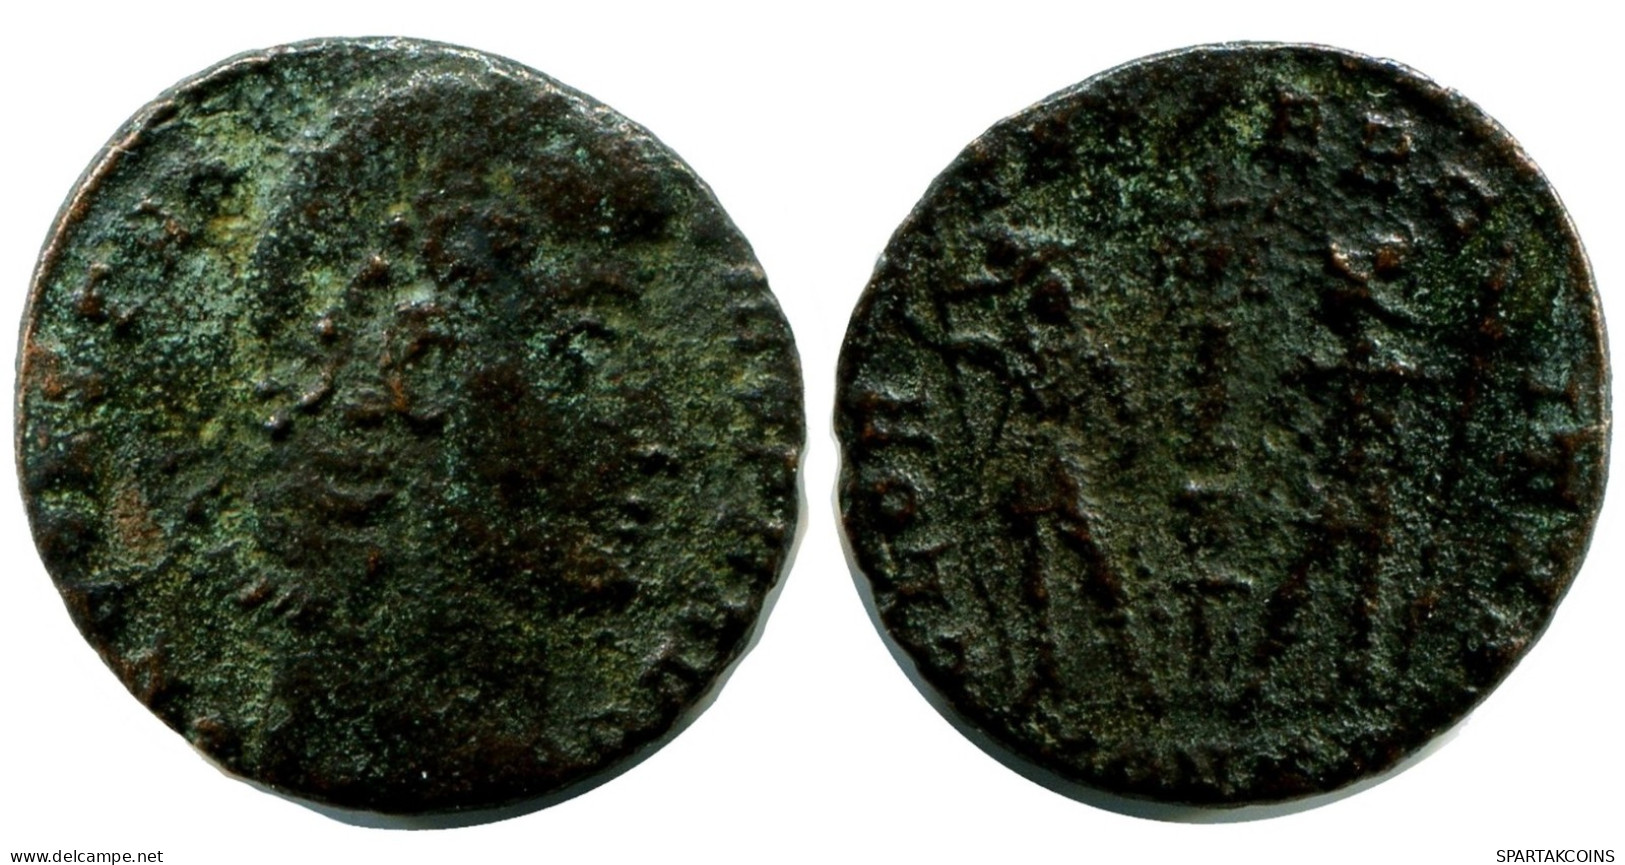 ROMAN Pièce MINTED IN CONSTANTINOPLE FOUND IN IHNASYAH HOARD #ANC11058.14.F.A - The Christian Empire (307 AD To 363 AD)